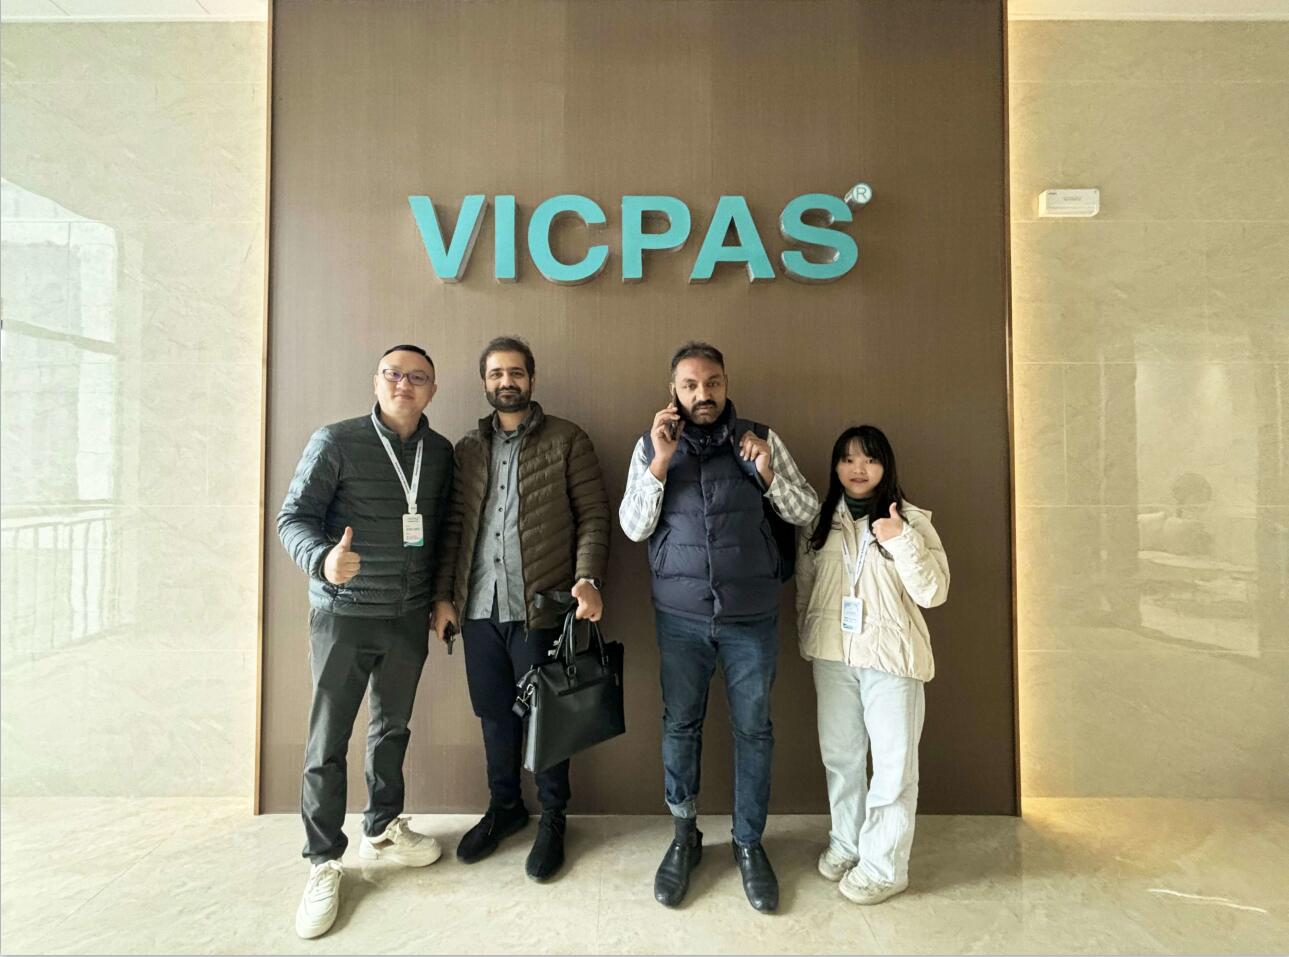 VICPAS Welcomes Mr. Arifgill, Esteemed Visitor from Pakistan